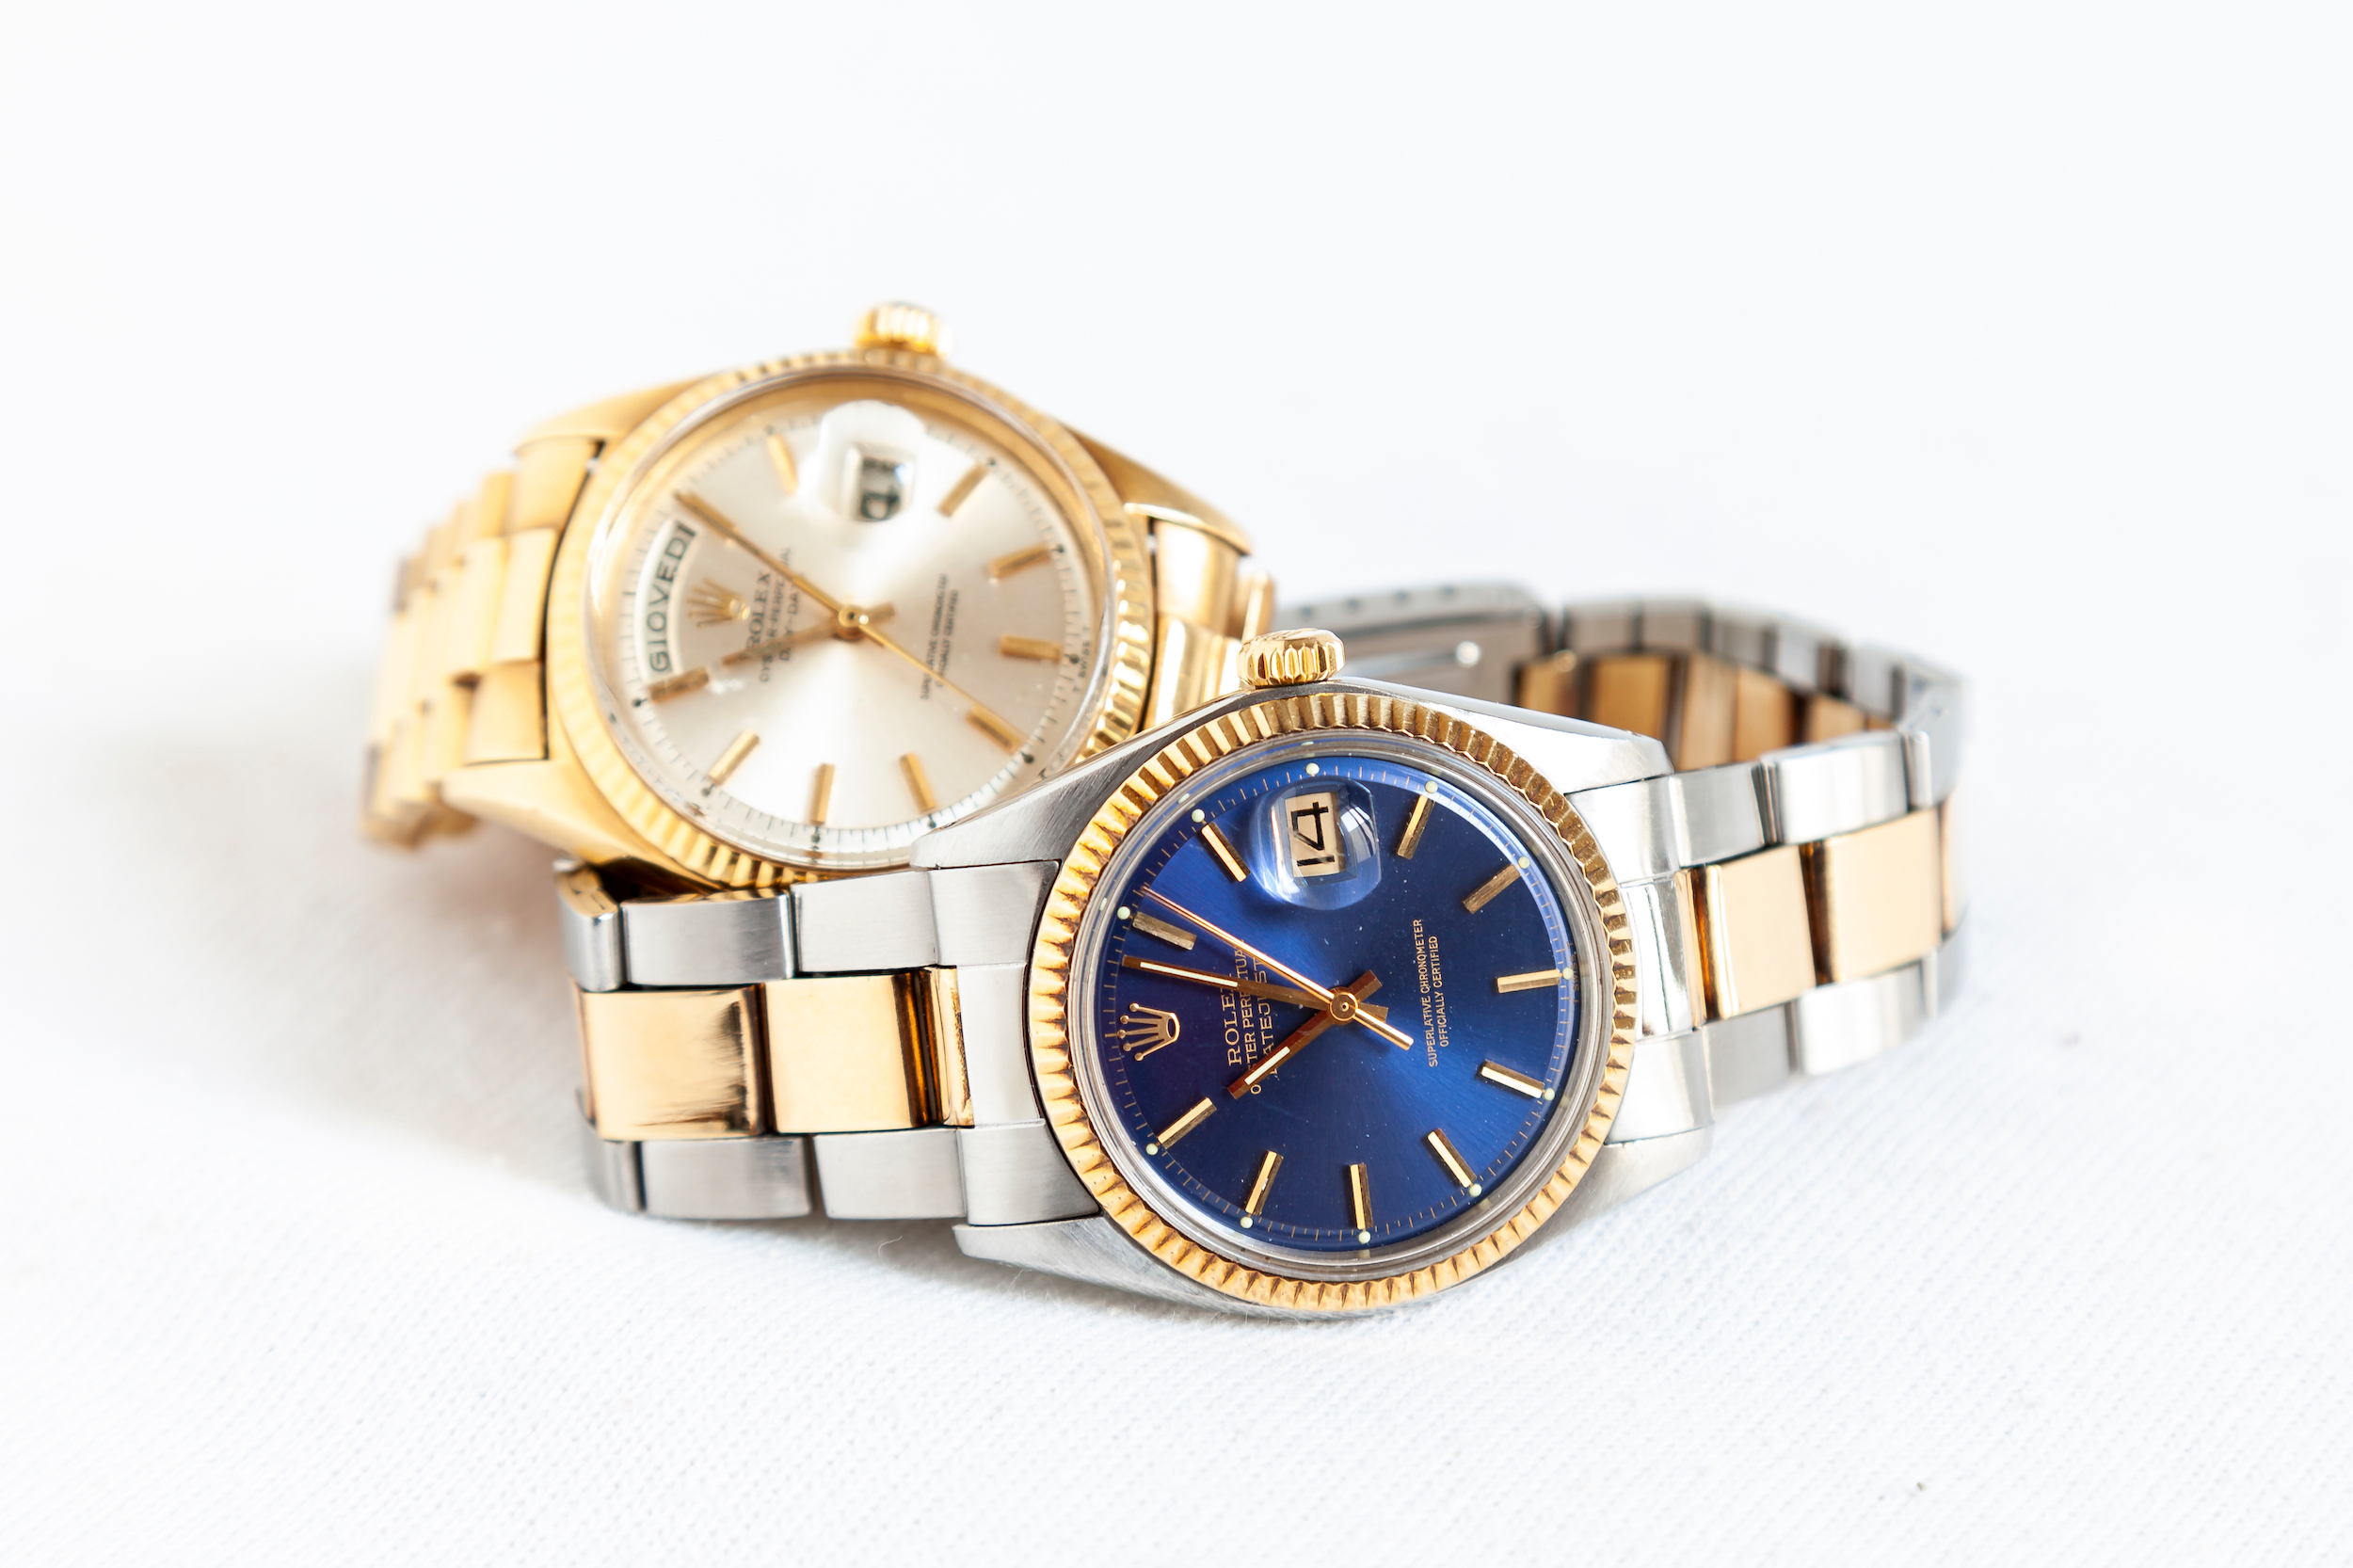 How much does a Rolex watch really cost?